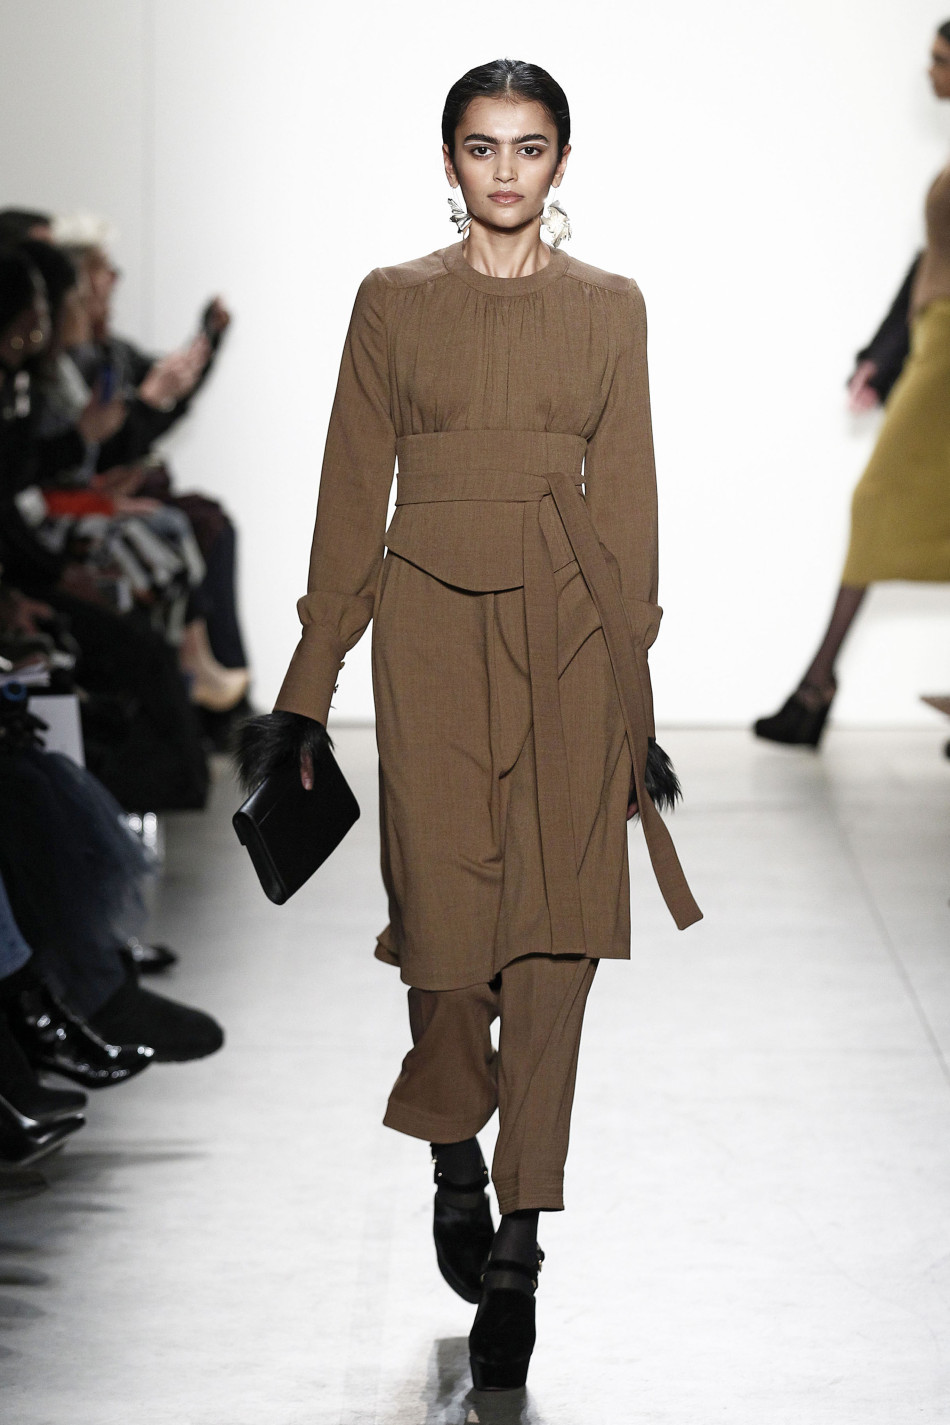 See our top ten looks from the runway in New York | Envelope